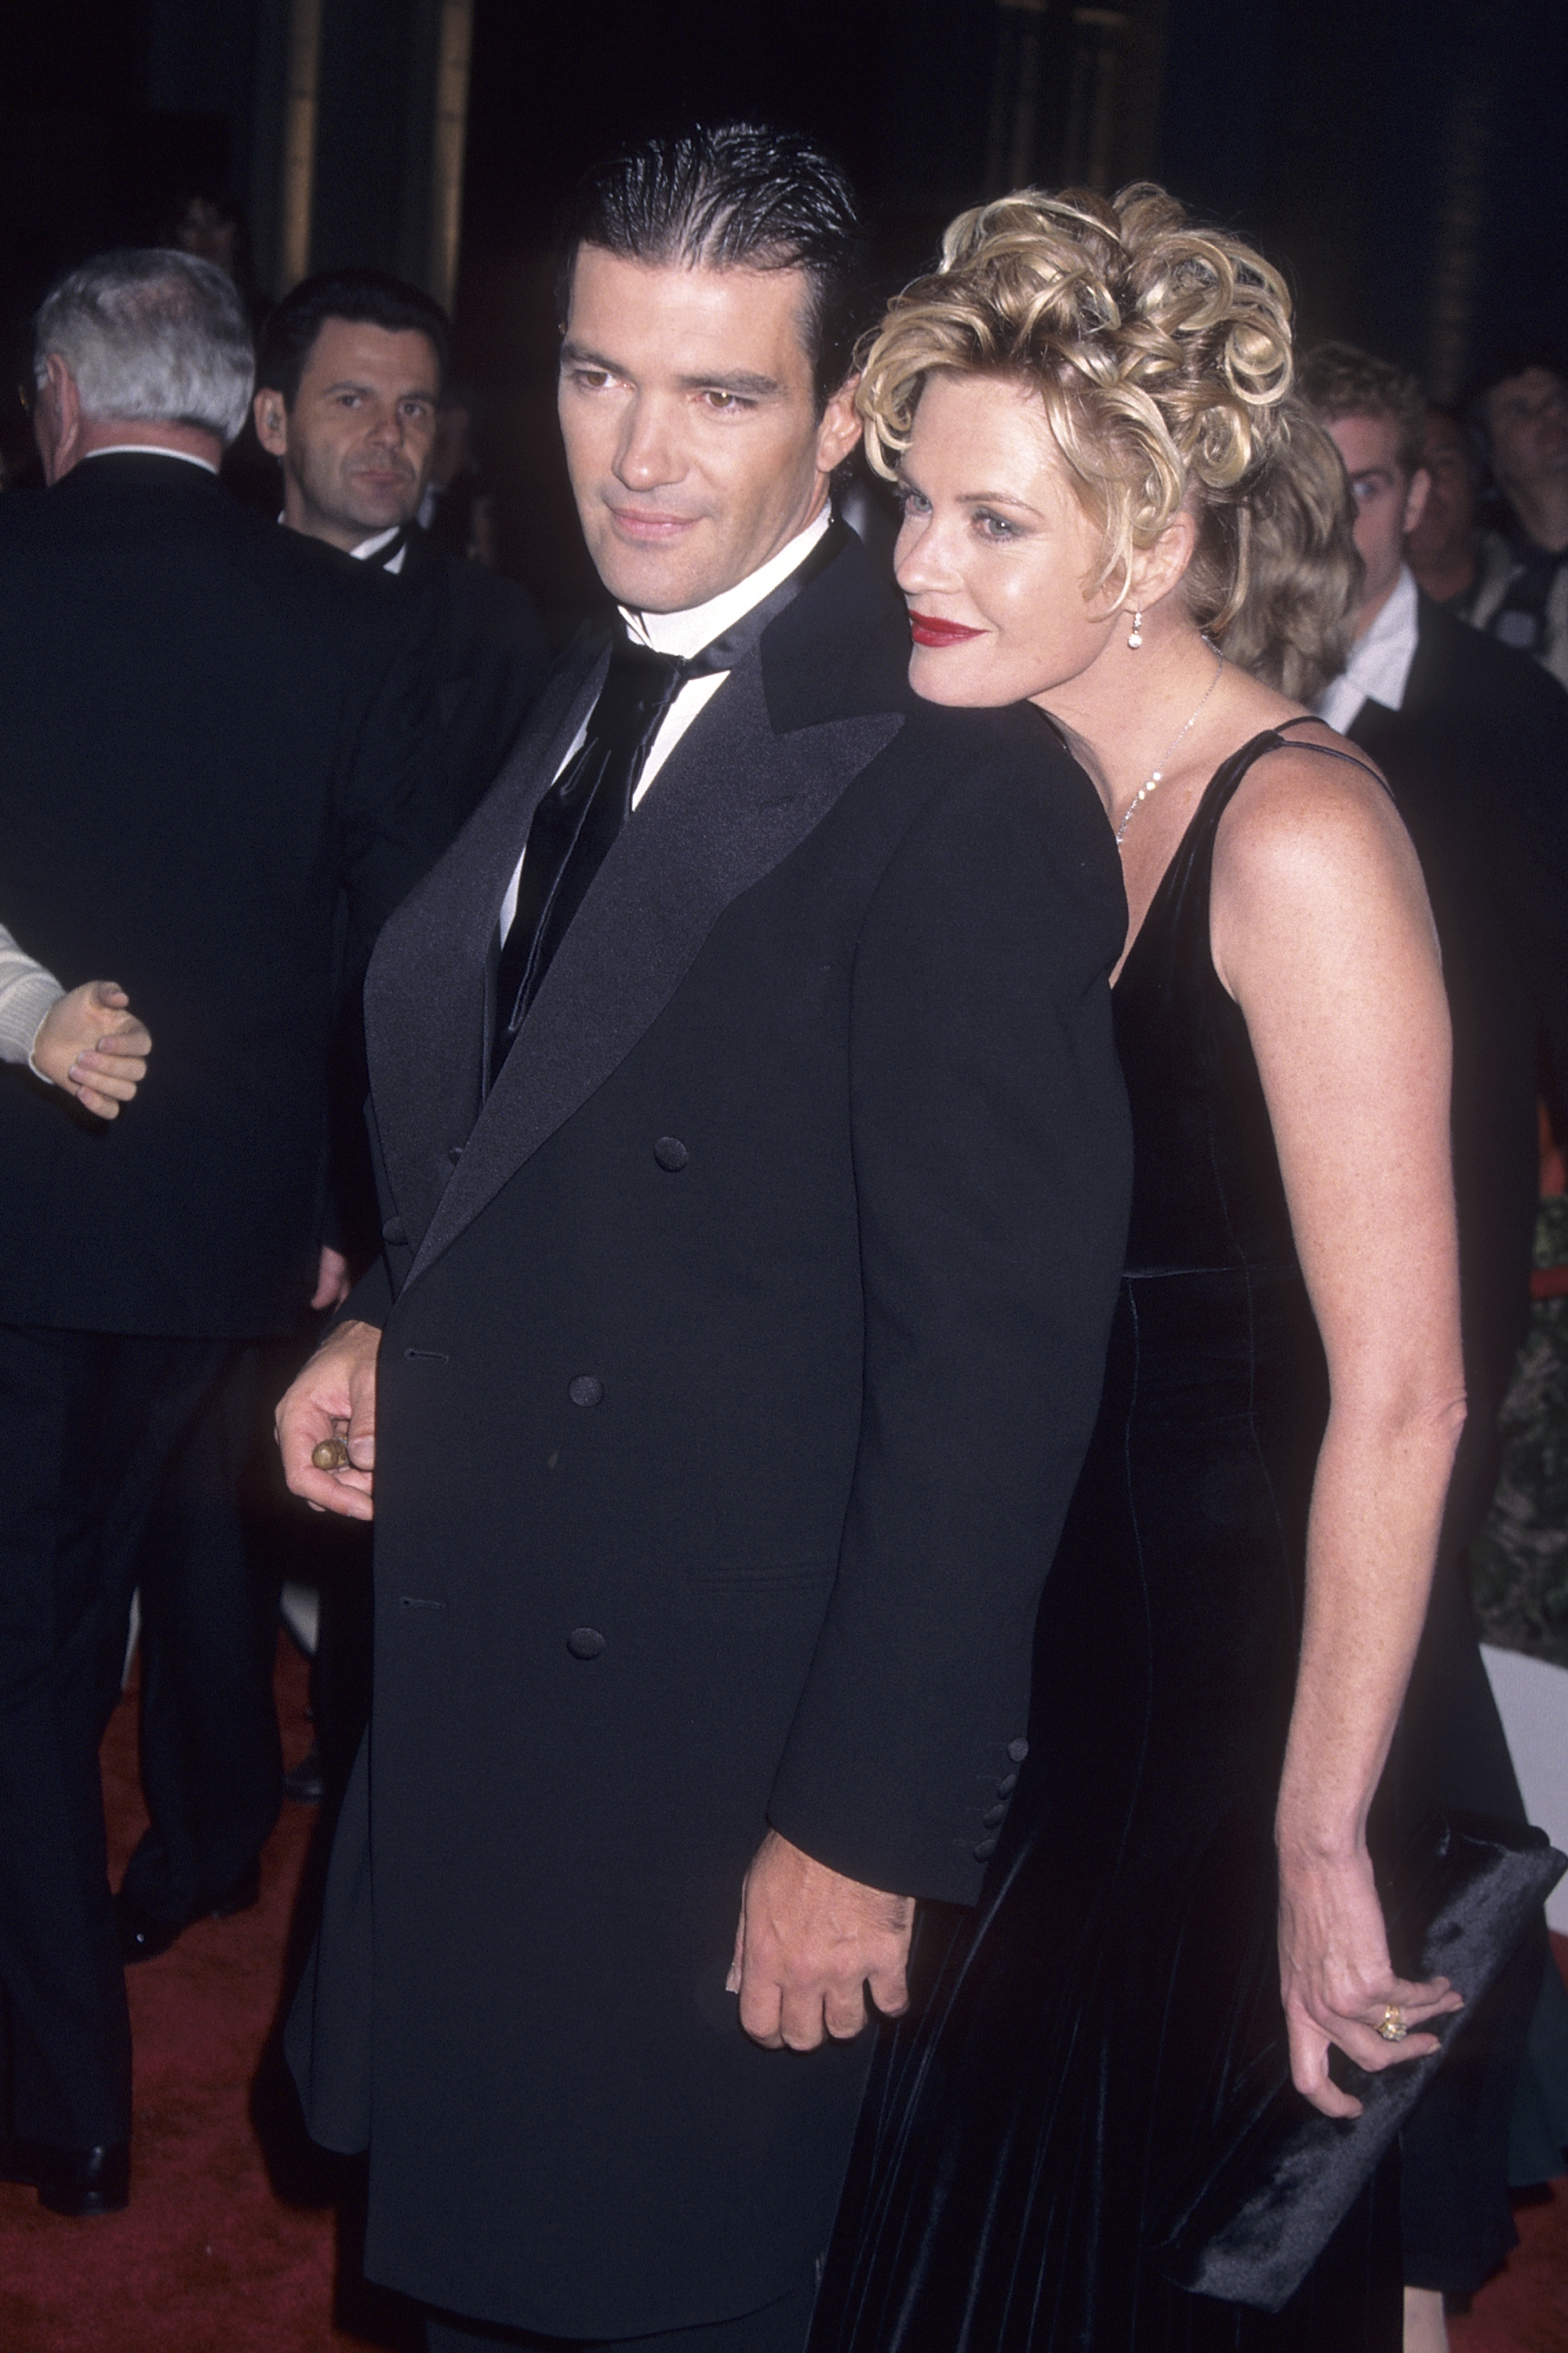 Antonio Banderas and Melanie Griffith on December 14, 1996 in Los Angeles, California | Source: Getty Images